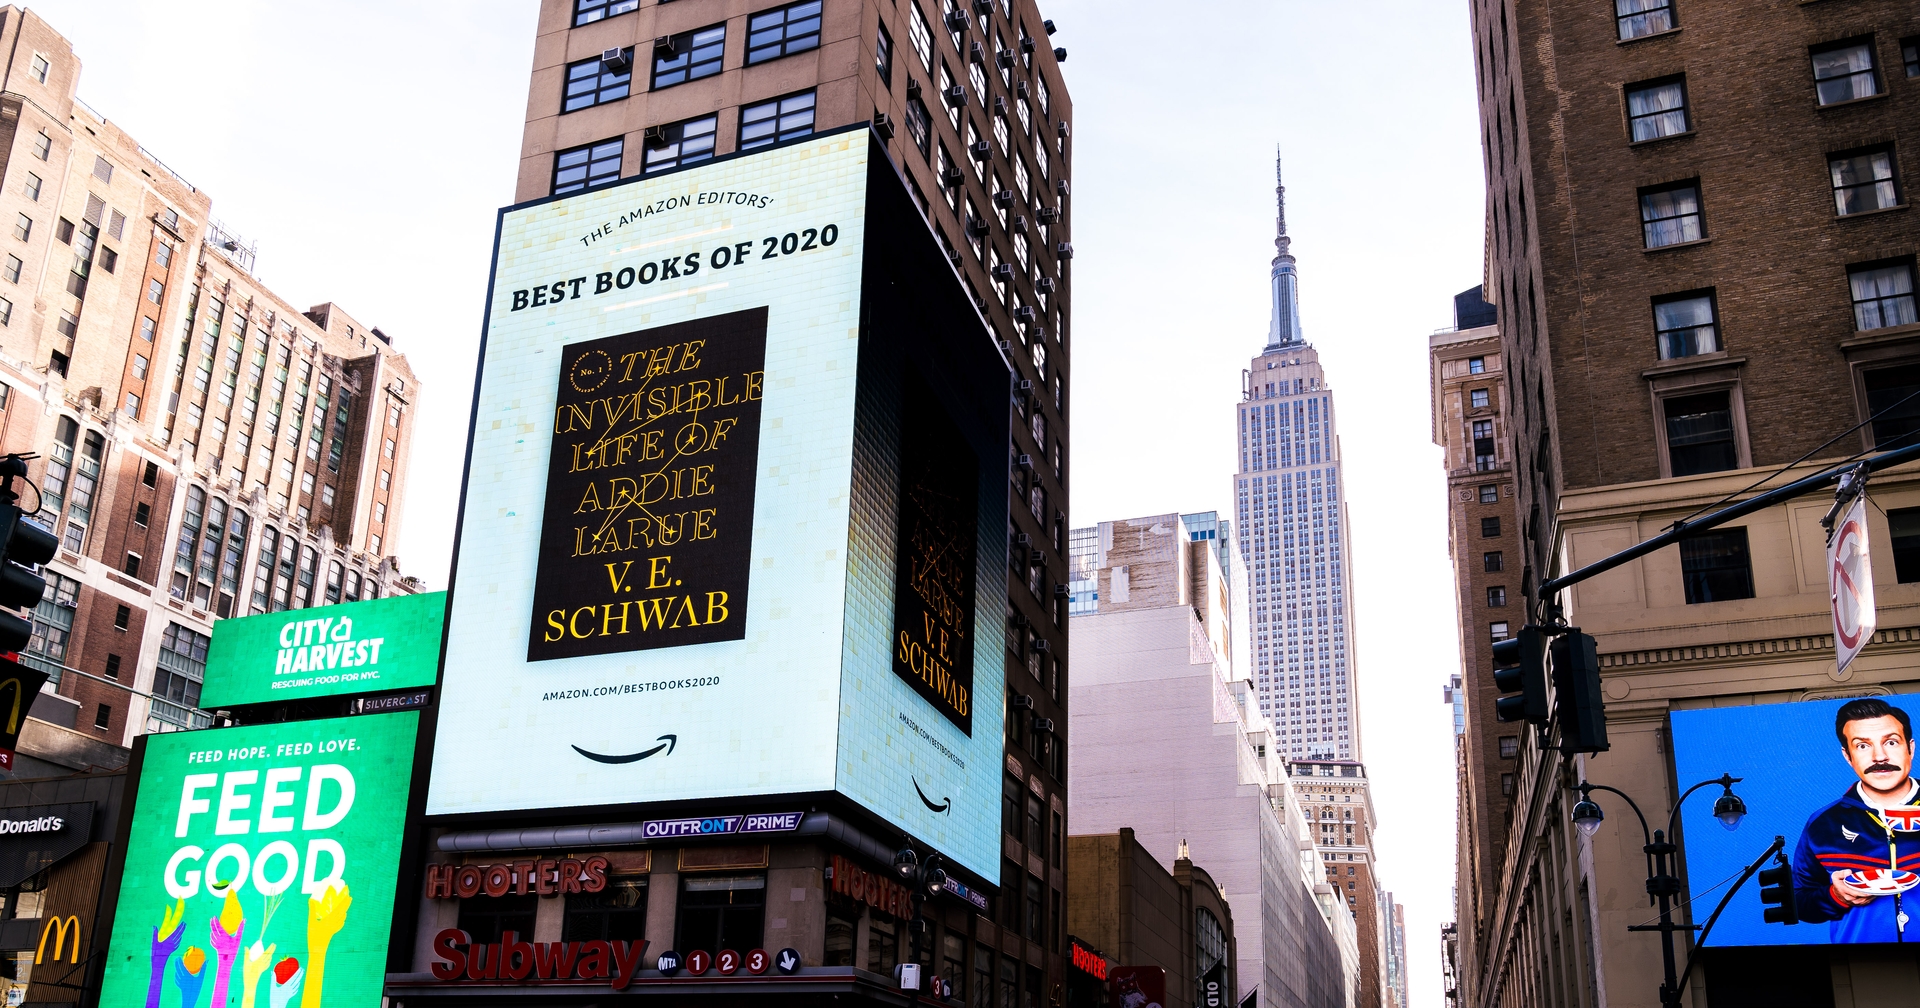 New York Square takeover of book title included Amazon's Best Books of the Year 2020 list. 